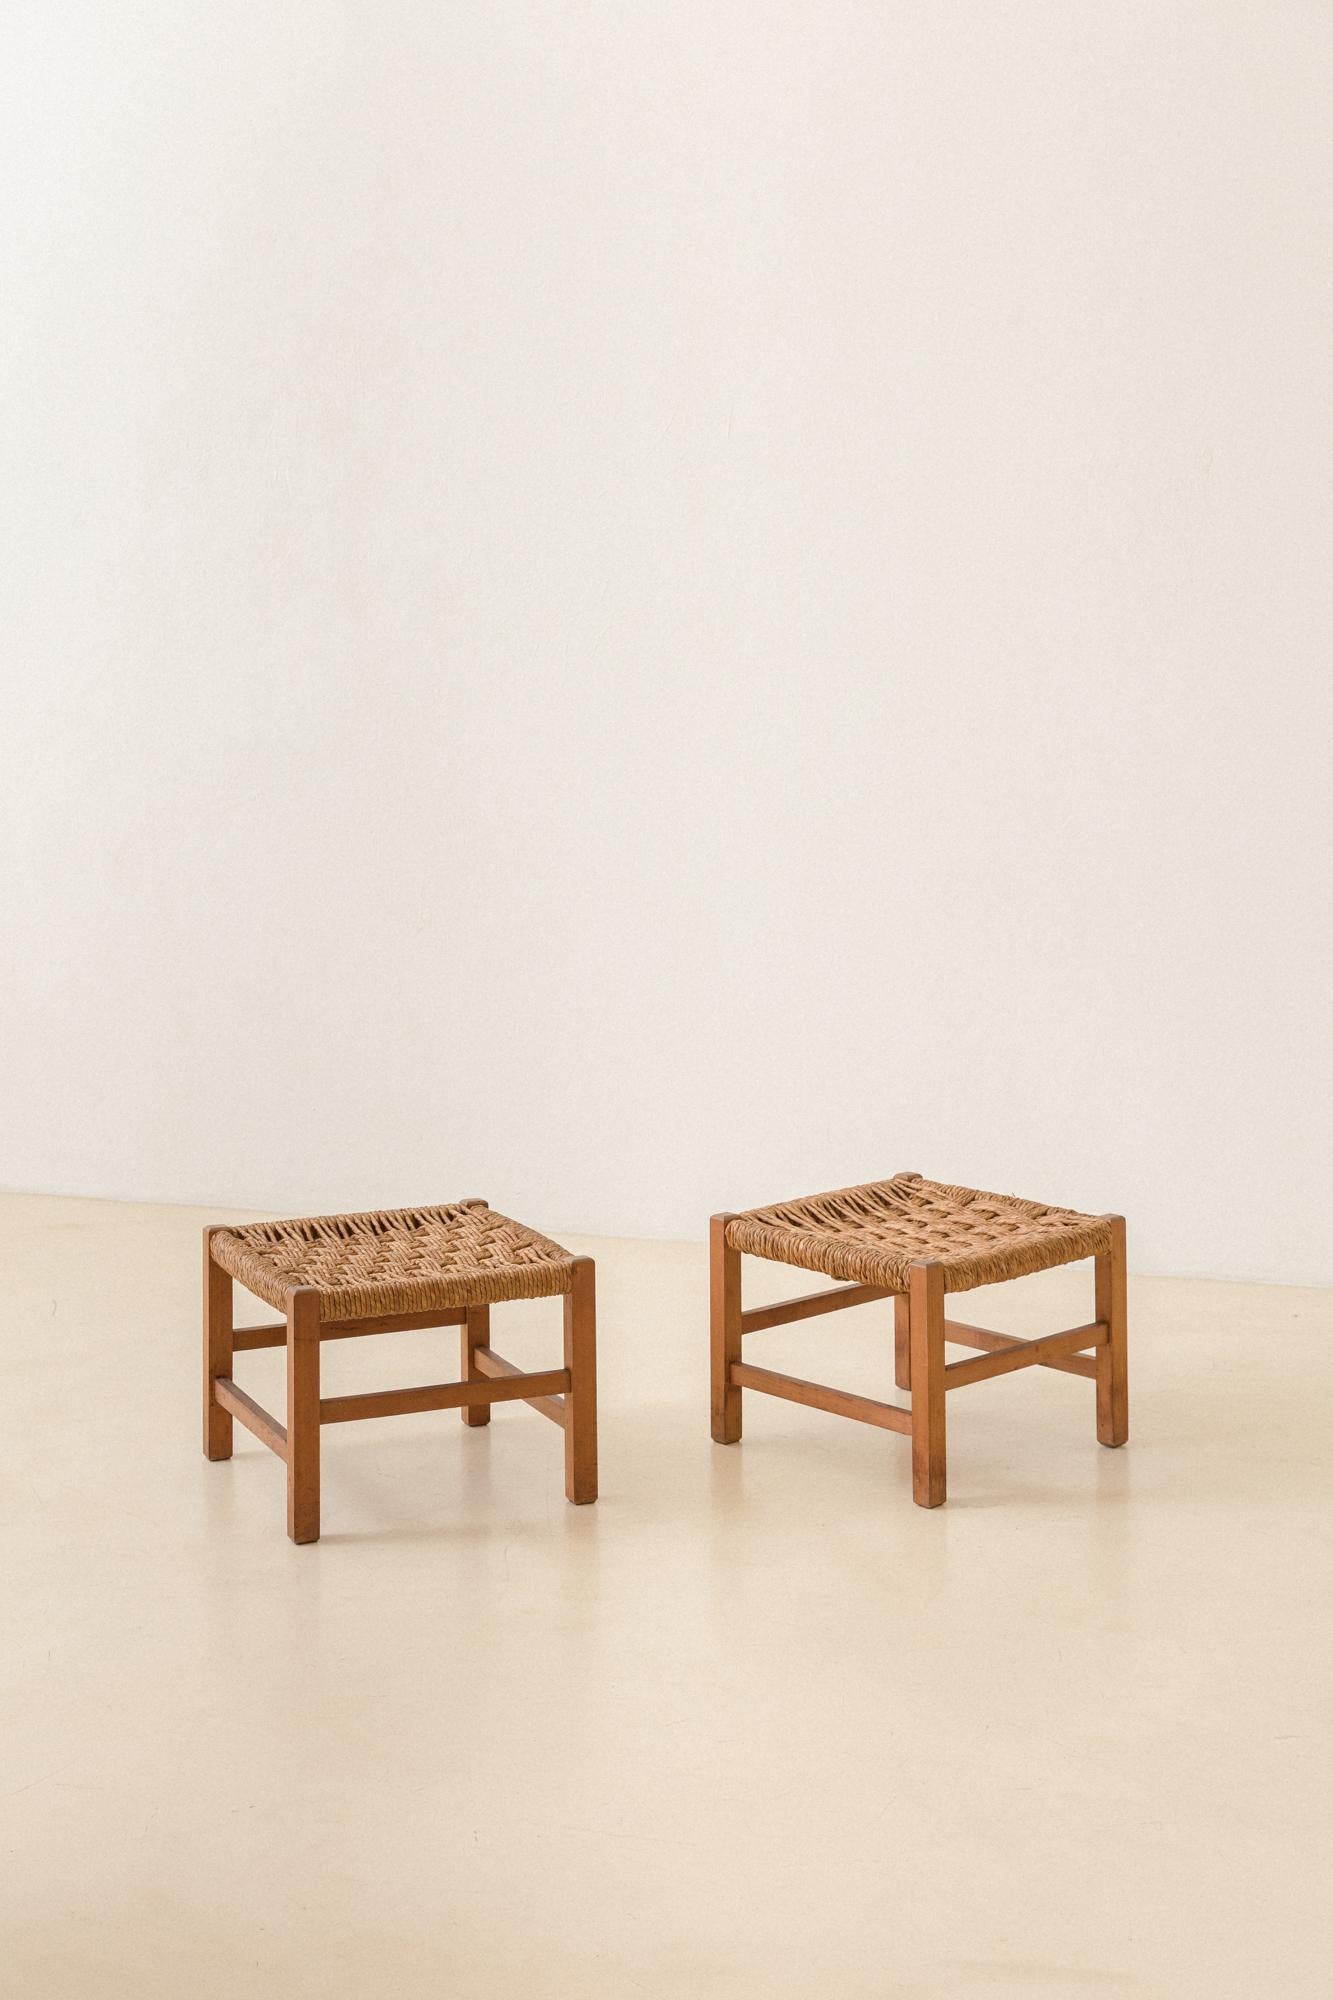 This pair of stools produced in the 1960s is composed of a solid wood rectangular structure with hand-woven taboa straw seats. The pieces still have the authorship unidentified by our team. 

The stool is one of the first forms of individual